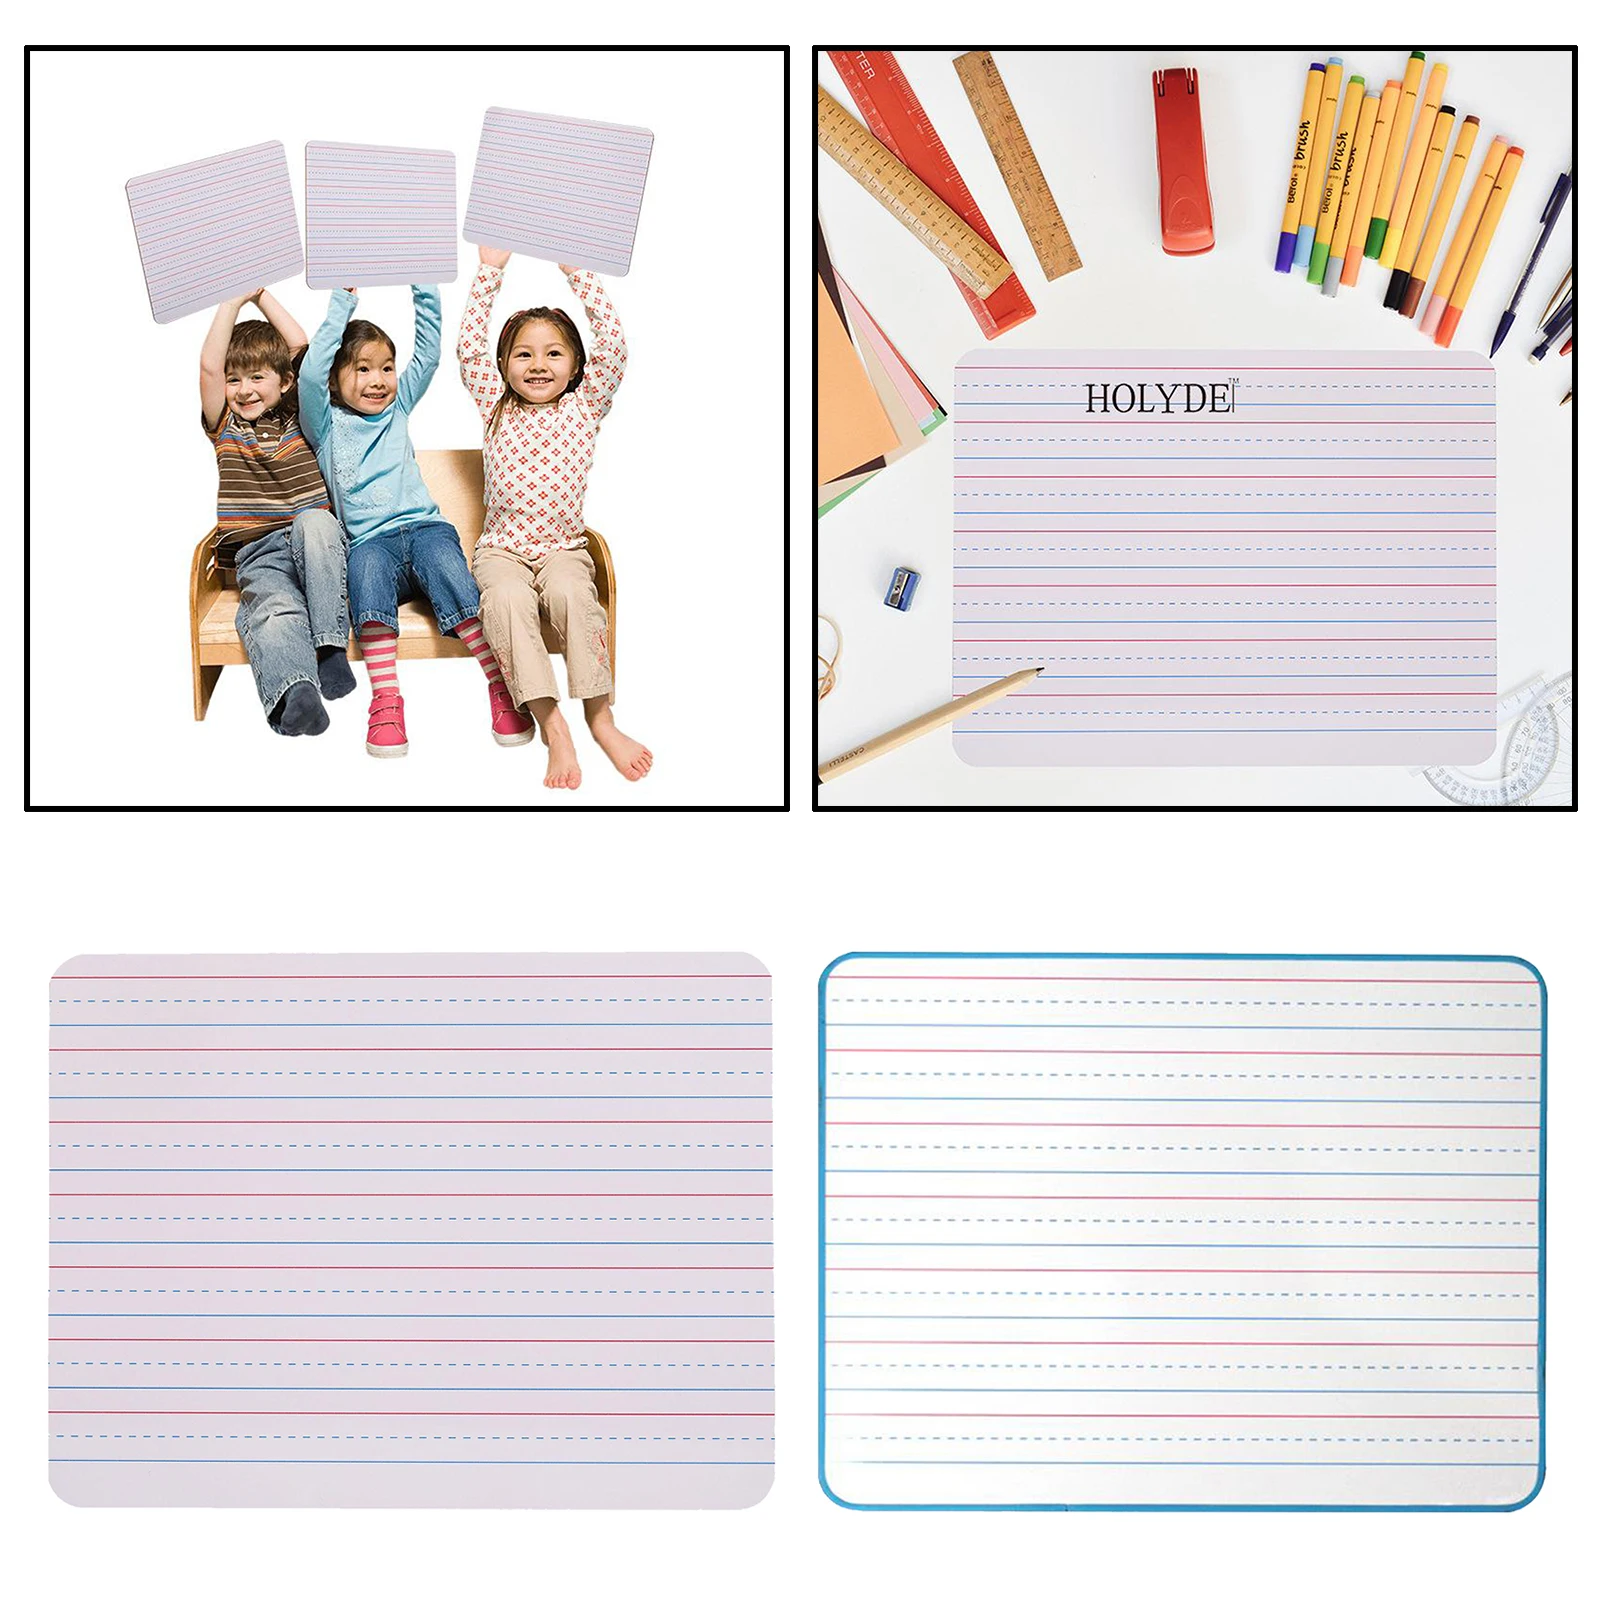 Dry Erase Lapboard Double Sided Mini Lapboards 9x12 inches 